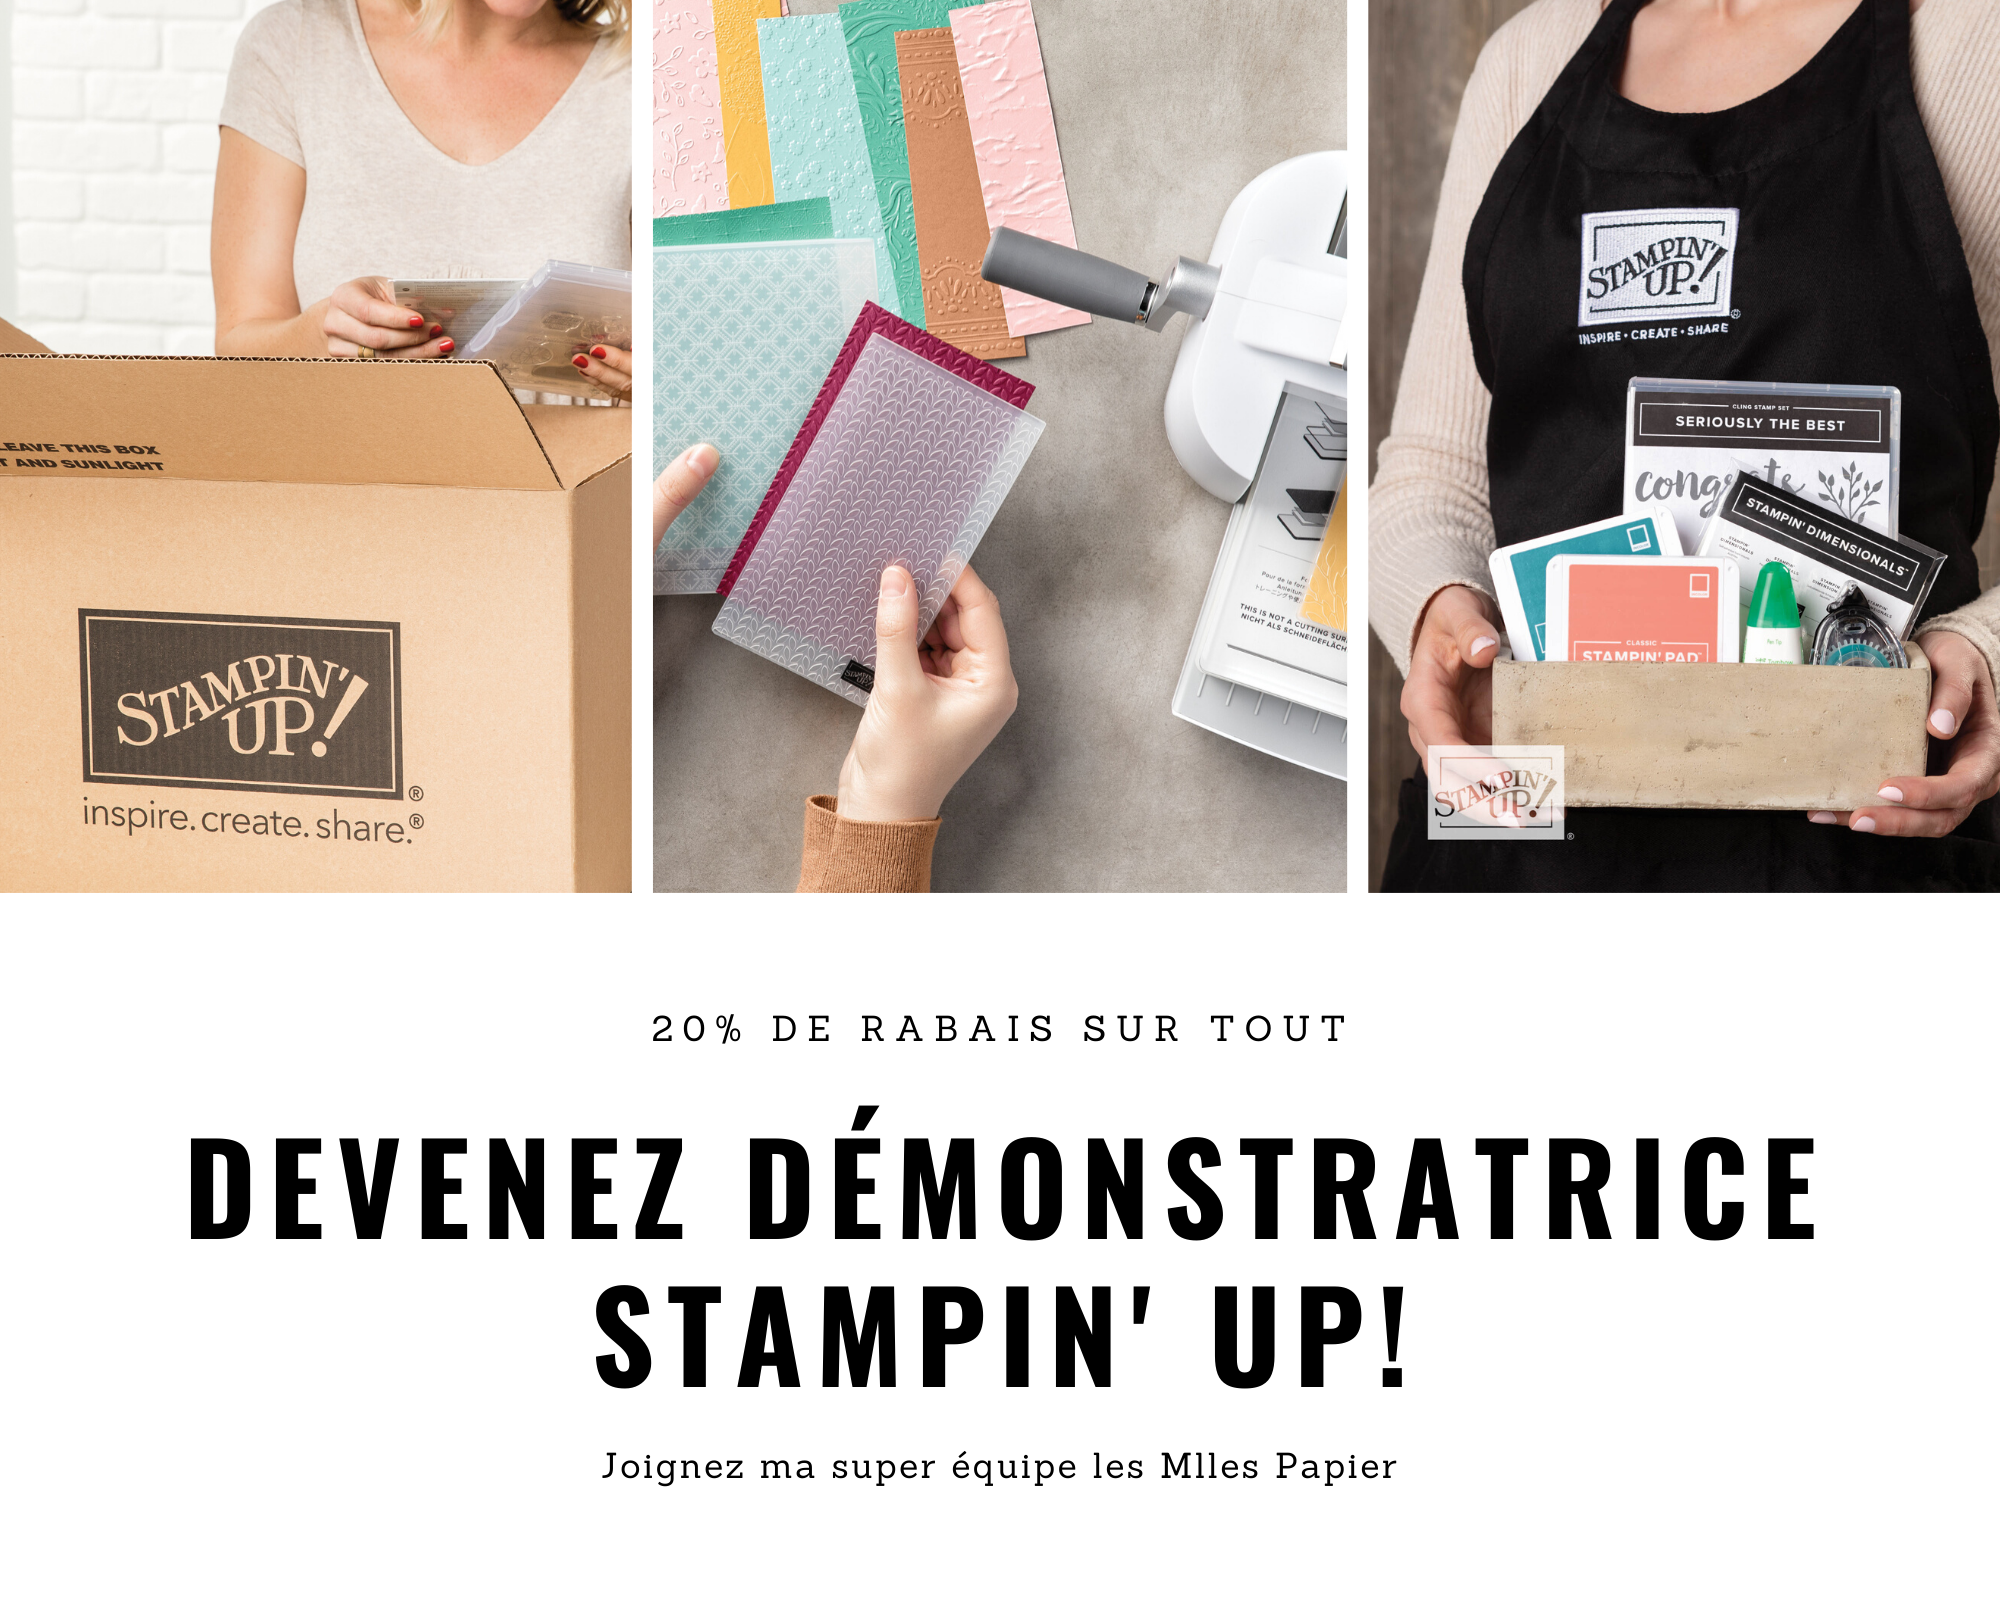 Démonstratrice Stampin' Up!